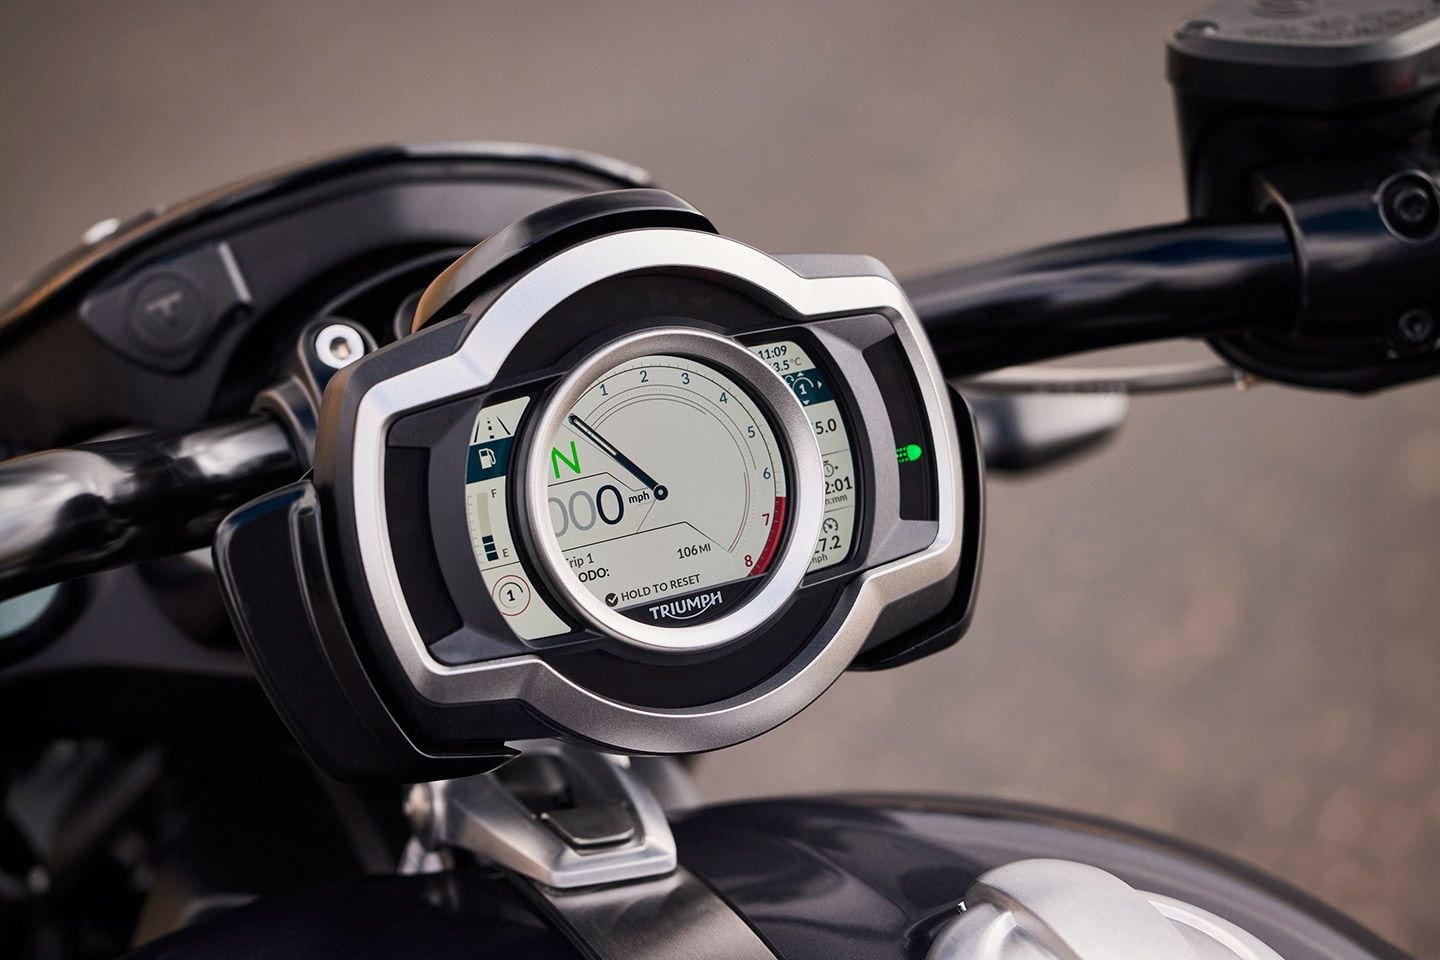 Electronics includes cornering ABS, traction control, cruise control, and four rider modes as standard, most viewable on the 5-inch TFT display.